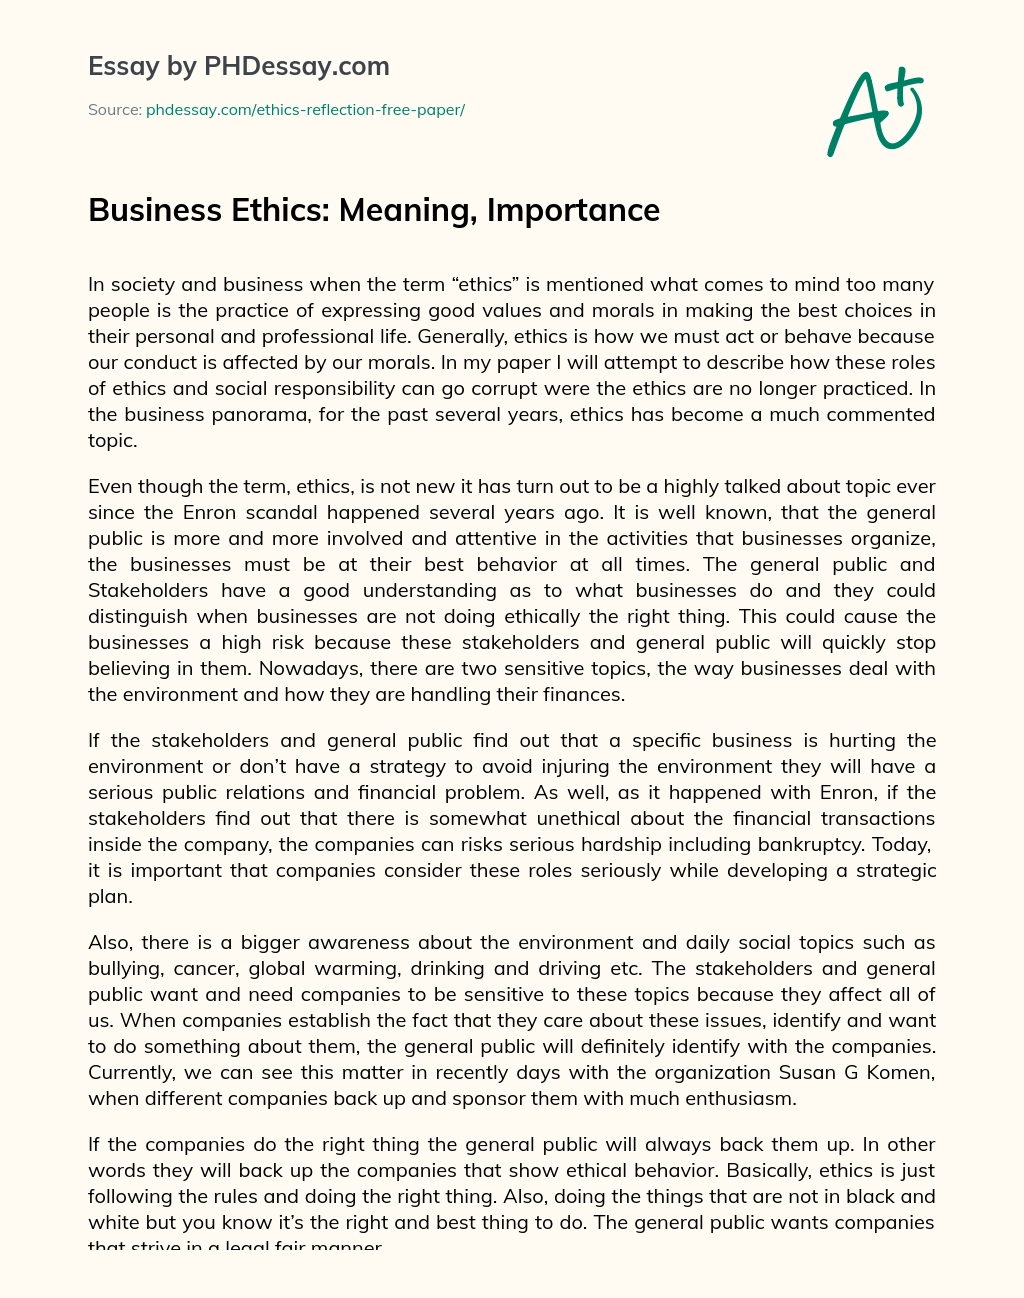 role of ethics in business essay